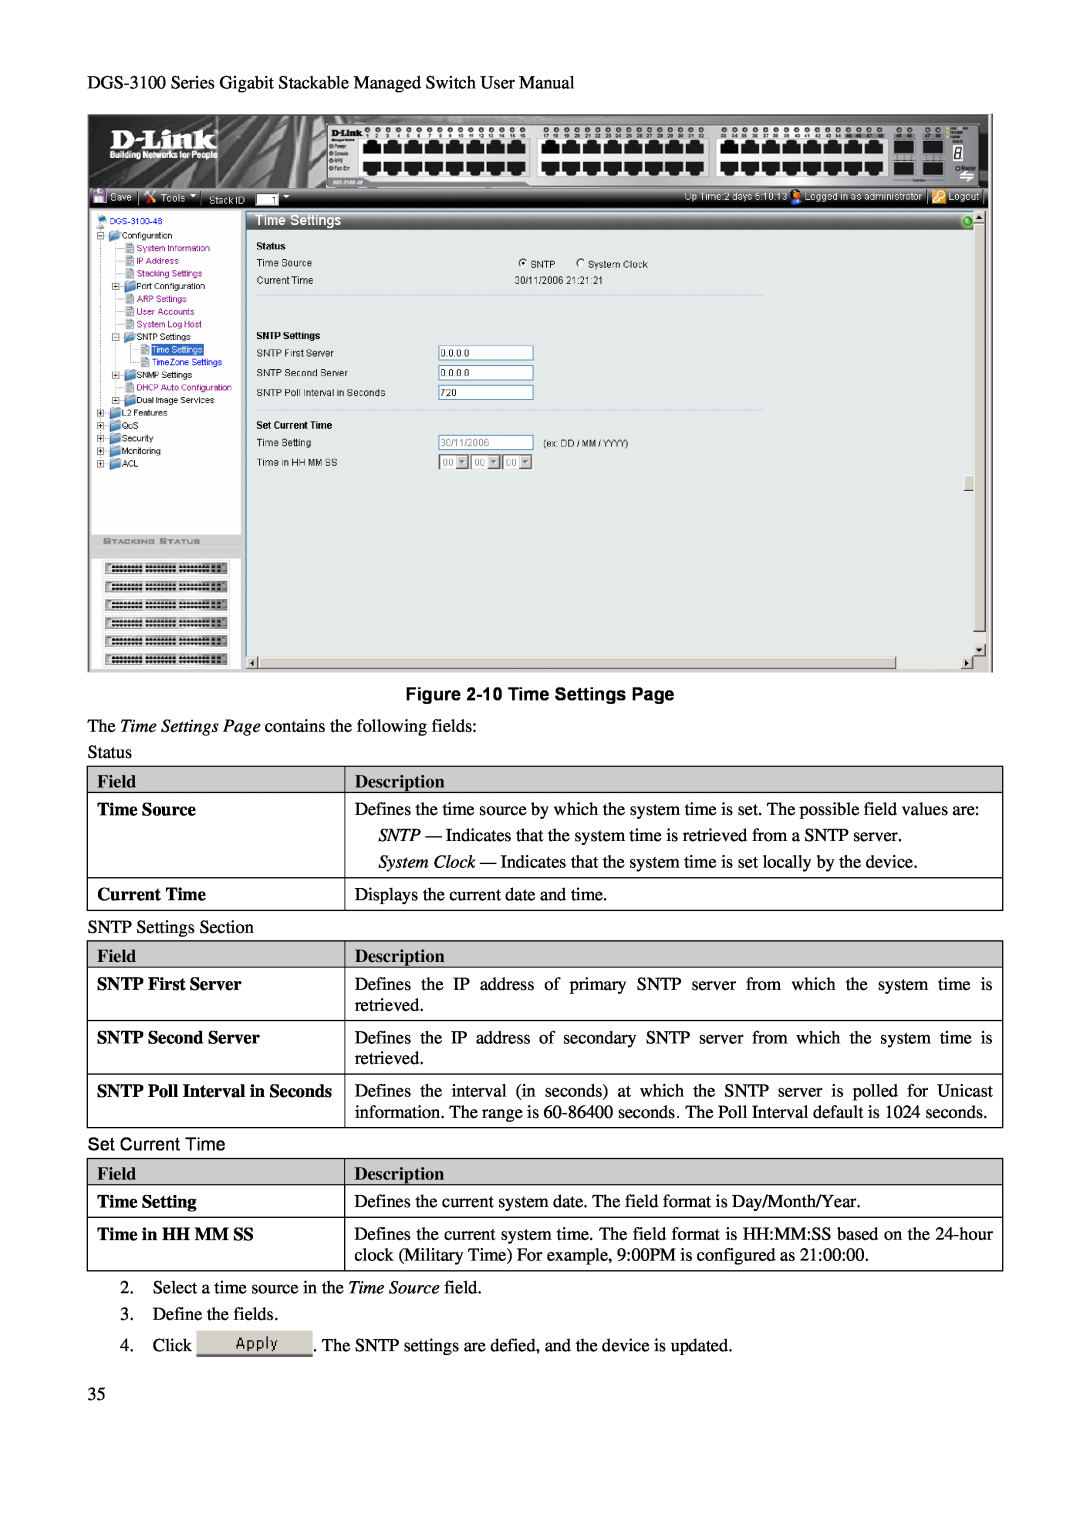 D-Link DGS-3100 user manual 10 Time Settings Page, Field, Description, Time Source, Current Time, SNTP First Server 